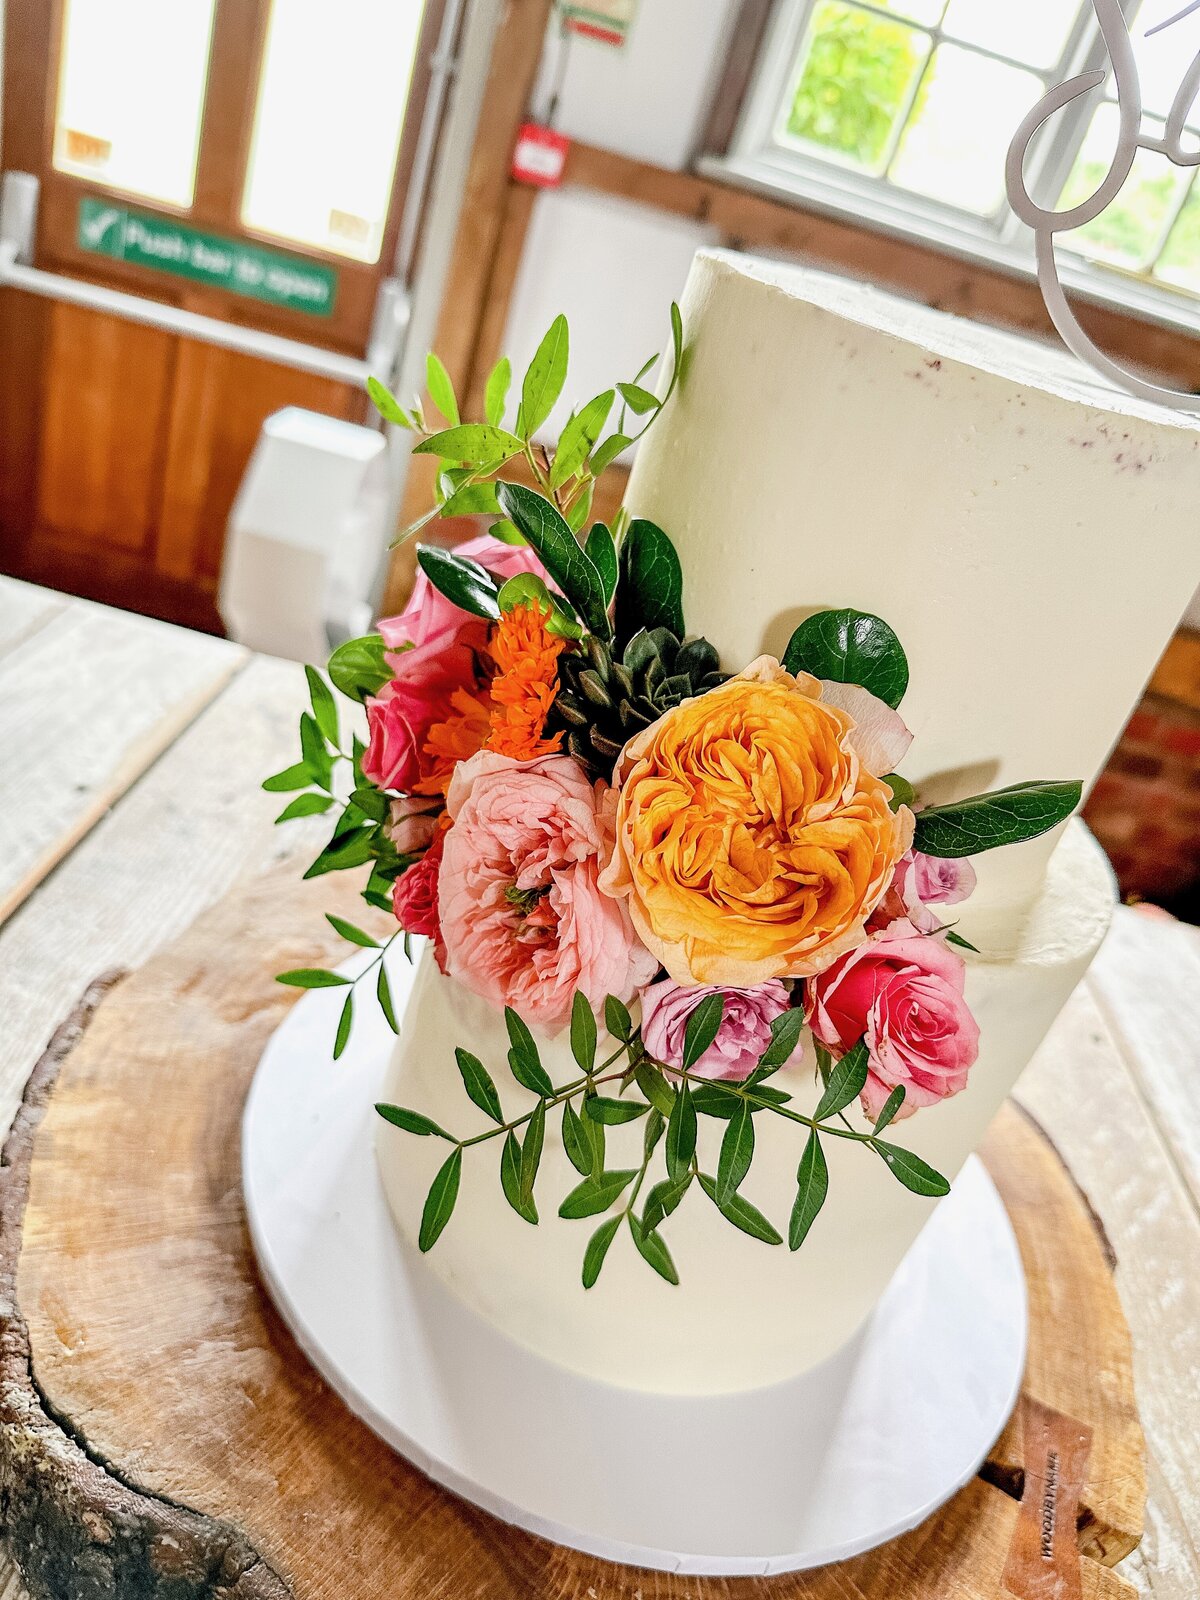 layers-graces-two-tier-buttercream-cake-semi-naked-milling-barn-fresh-flowers